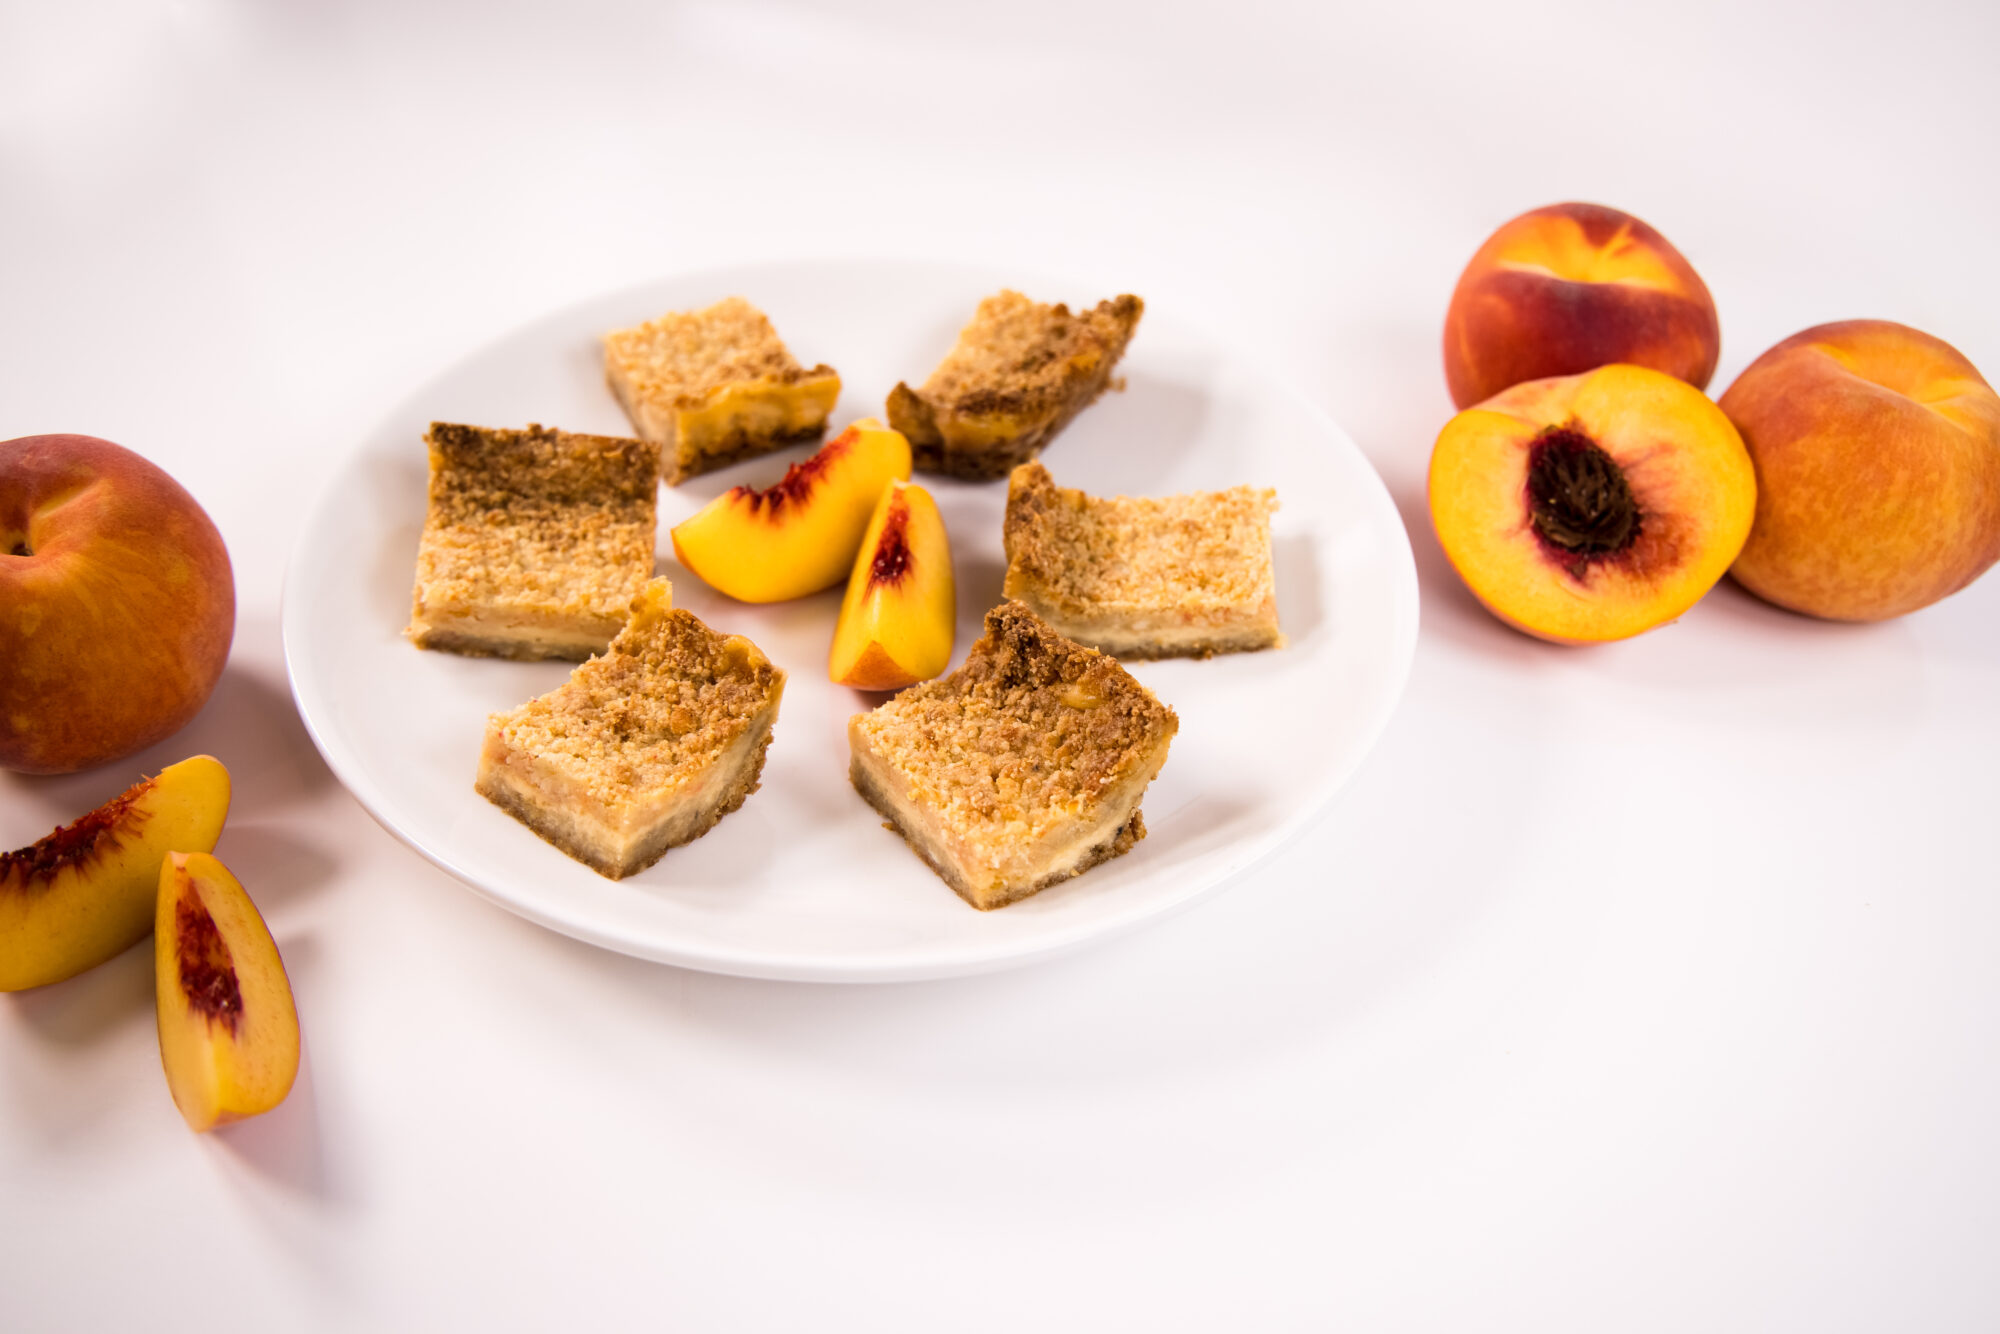 Peaches and Cream Crumb Bars on a white plate with slices of fresh peaches.